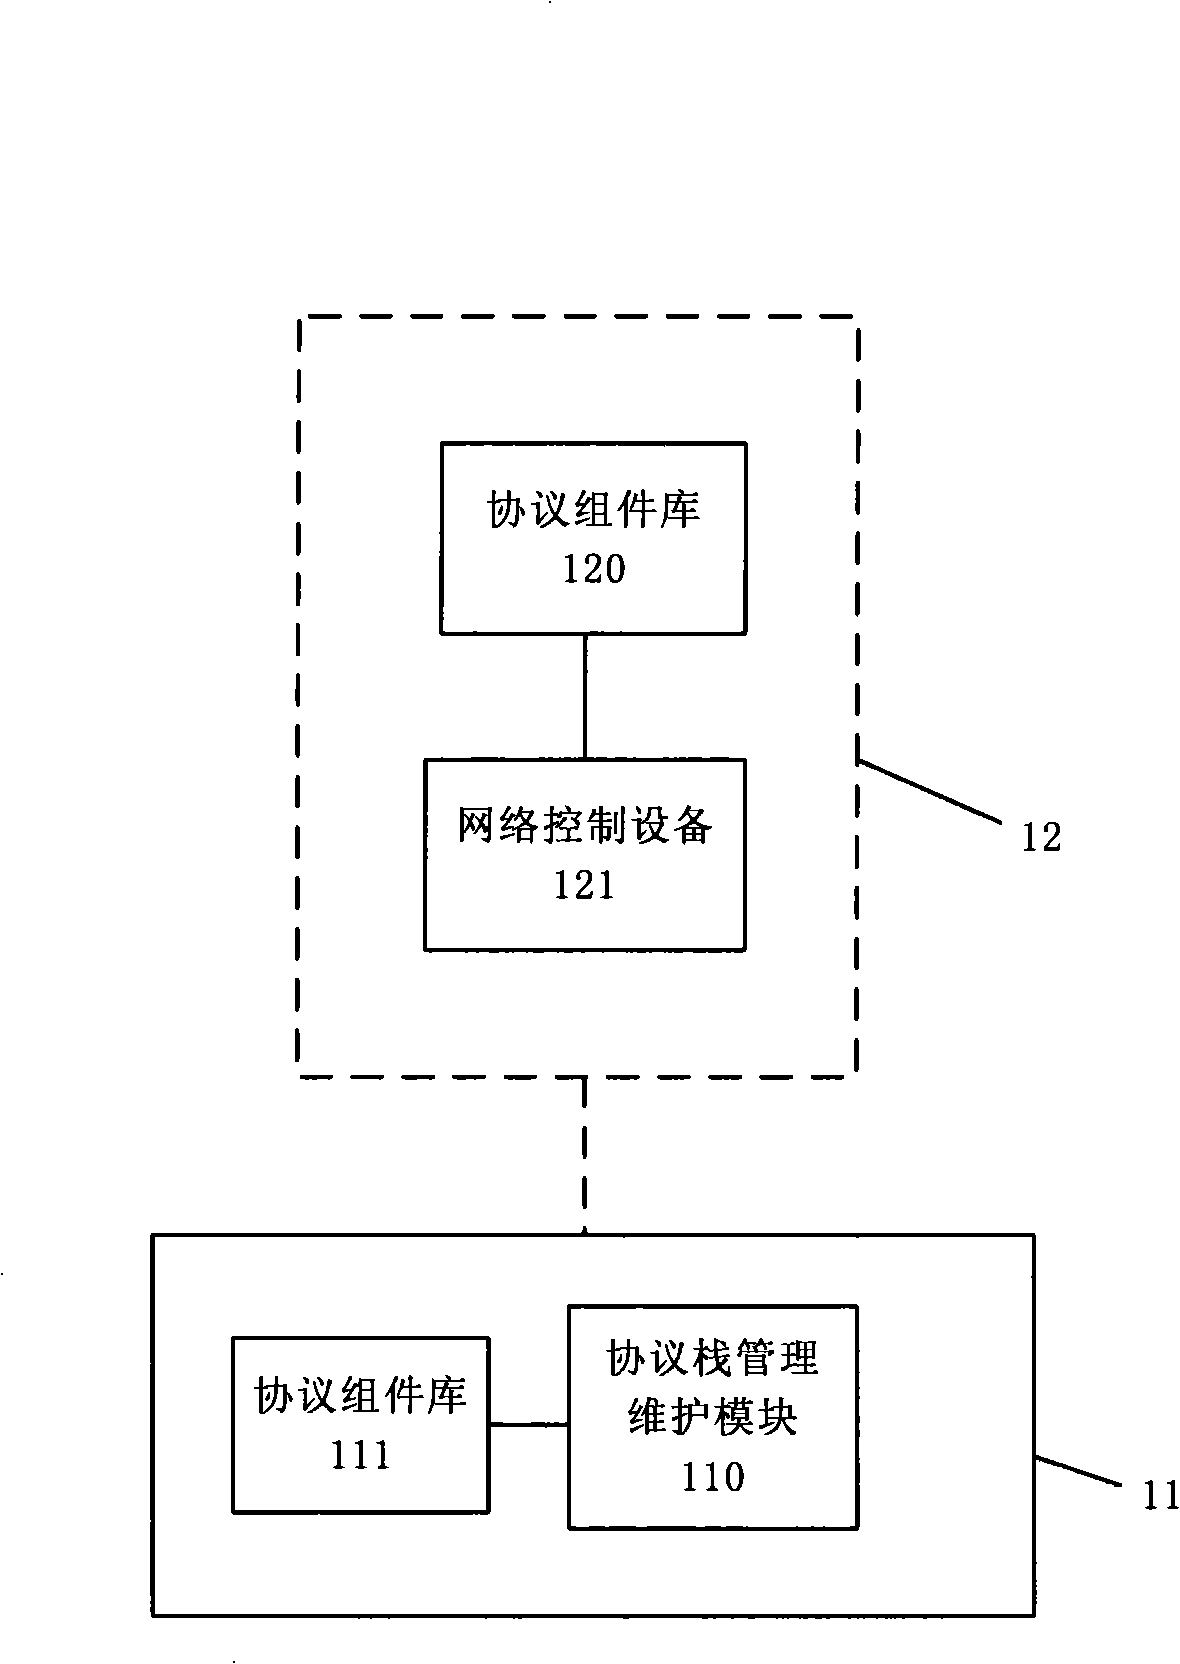 Method and apparatus for optimization of protocol stack of communication system based on subassembly